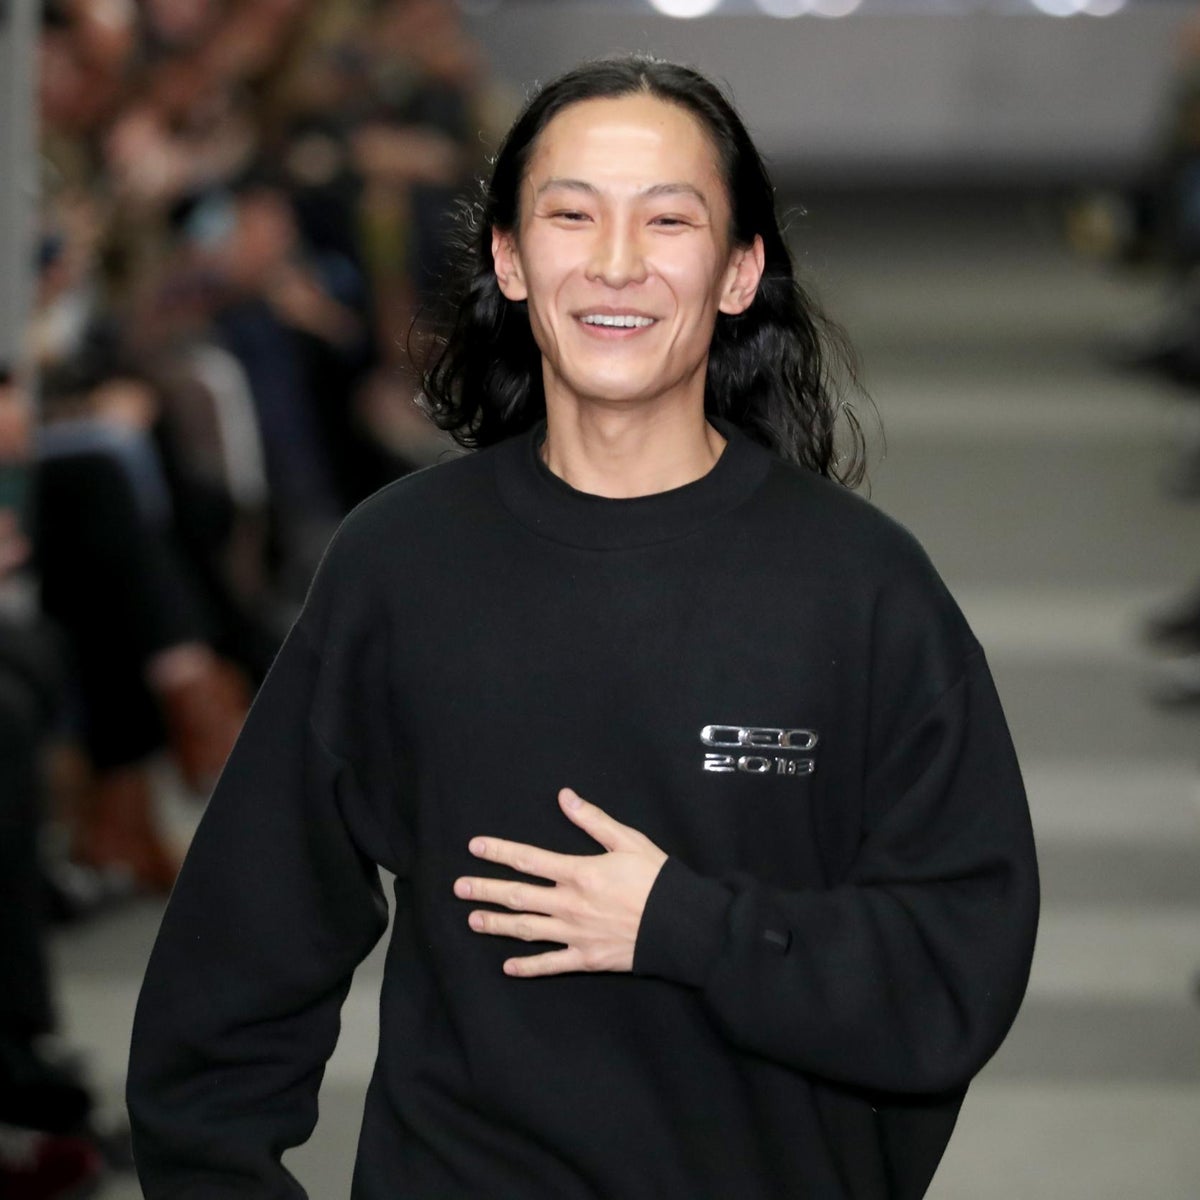 https://static.independent.co.uk/s3fs-public/thumbnails/image/2018/10/11/12/alexander-wang.jpg?width=1200&height=1200&fit=crop